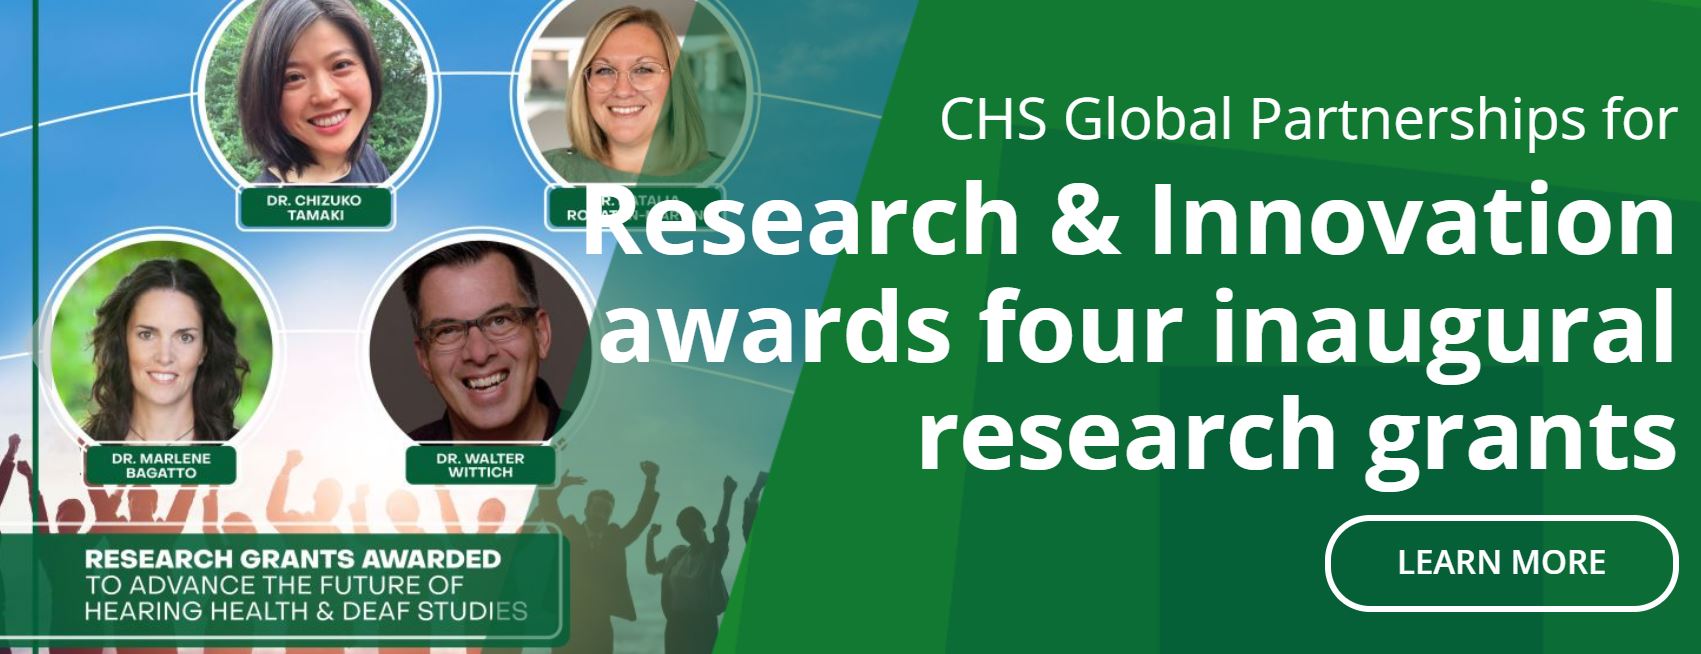 Featured image for “CHS Global Partnerships for Research & Innovation Awards Four Research Grants to Advance Hearing Health and Deaf Studies”